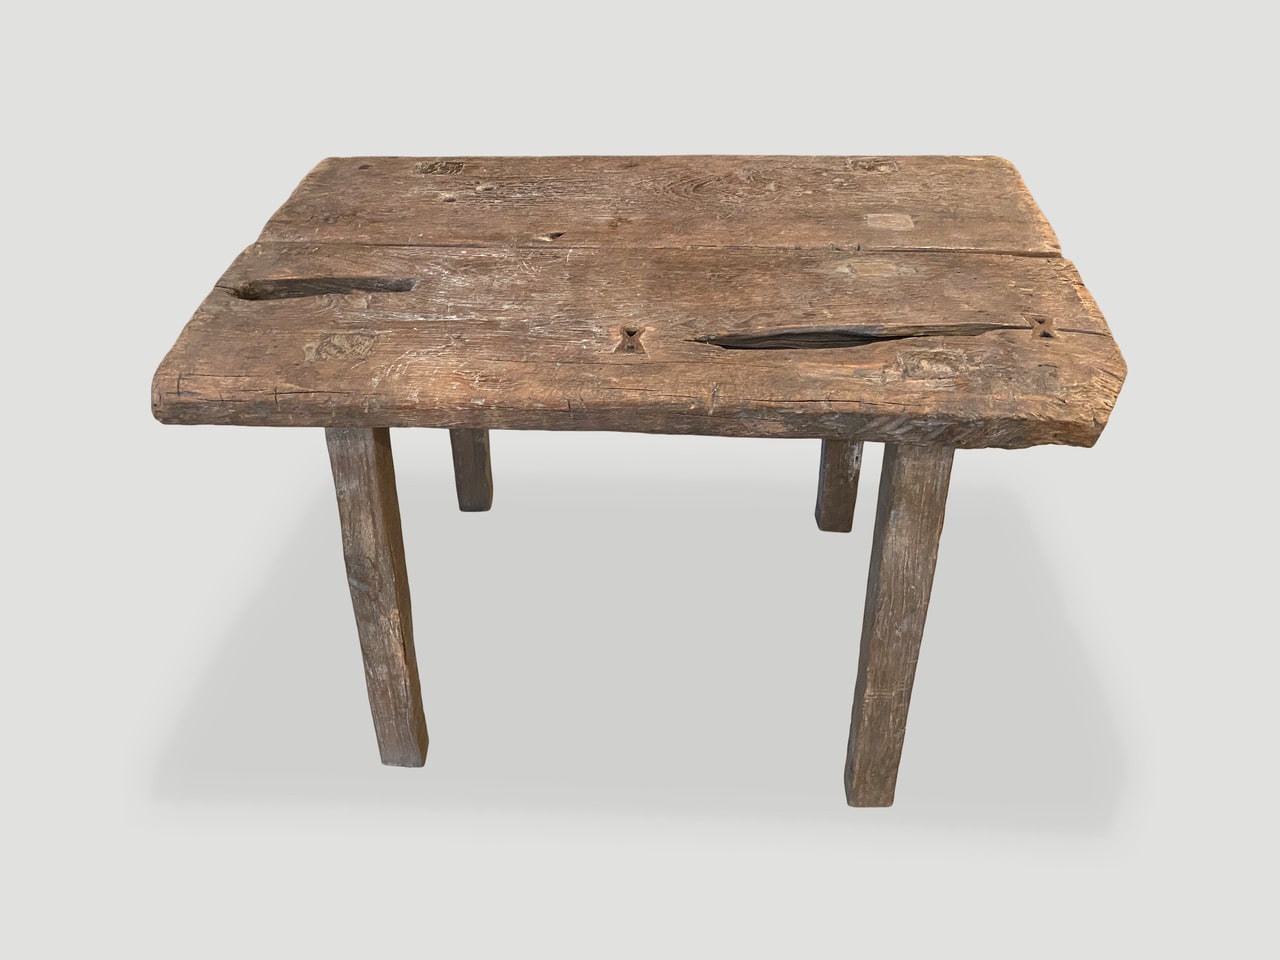 Wabi Sabi side table or small console table